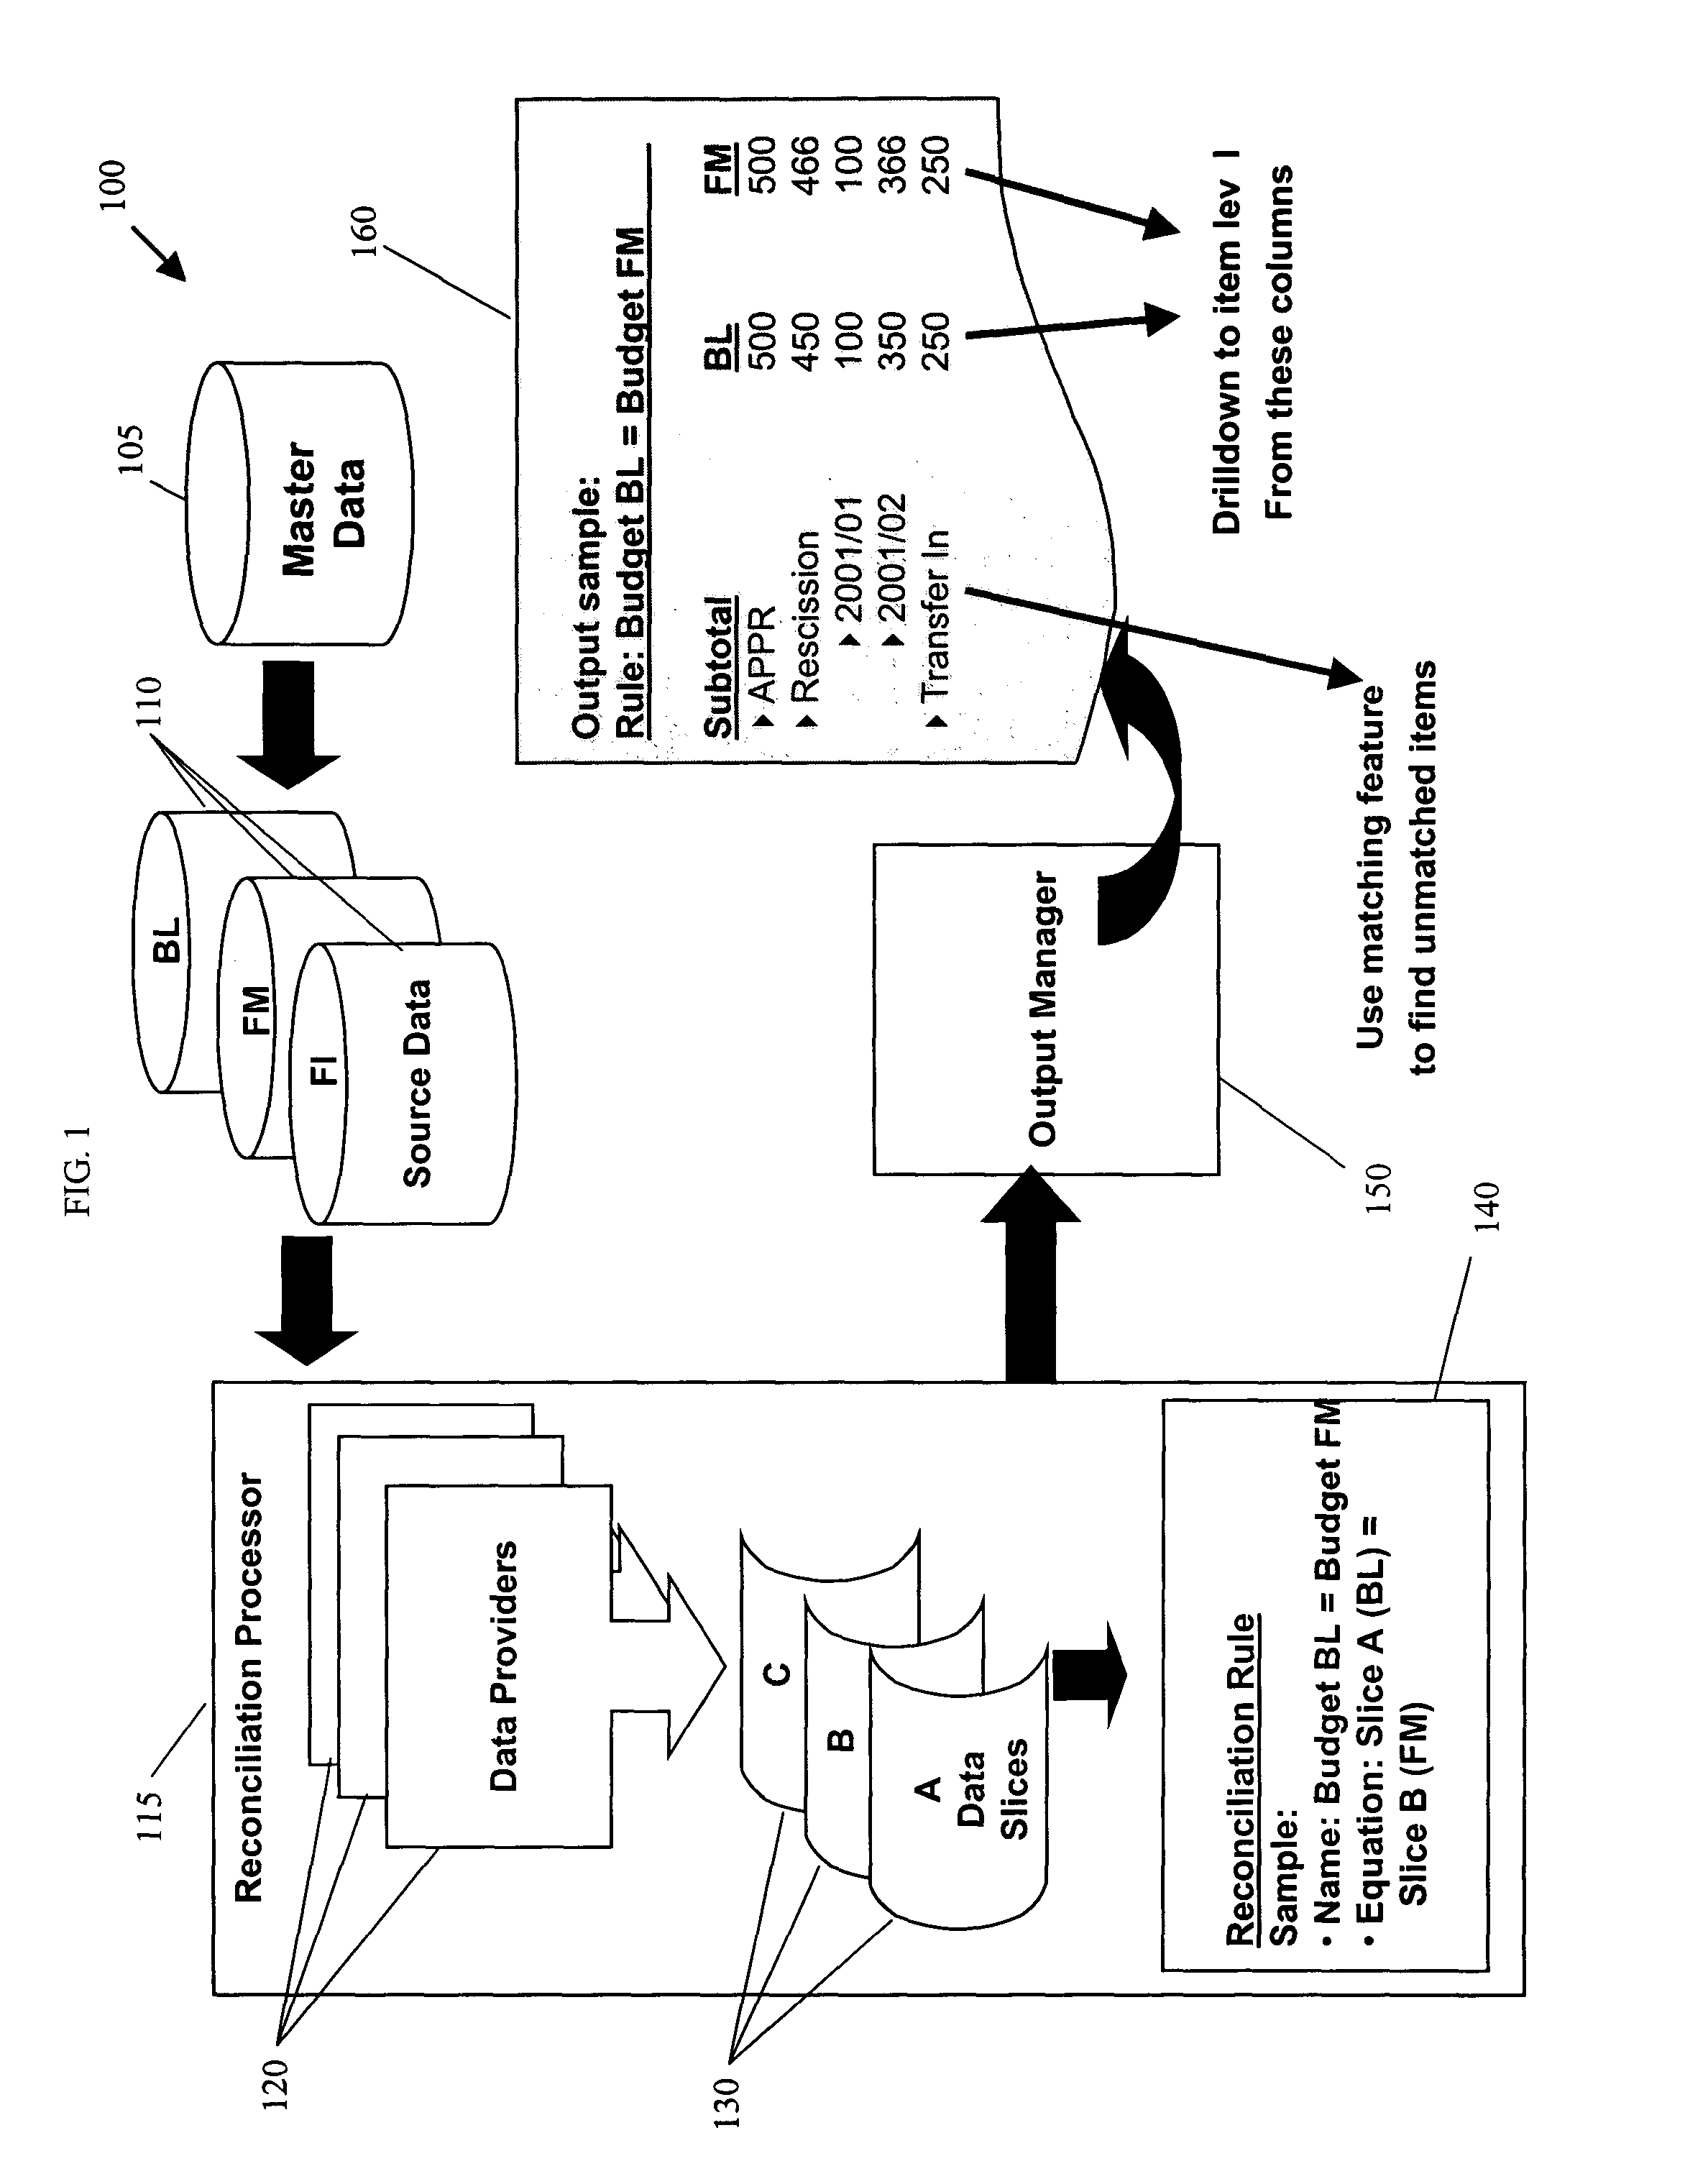 System and method for data reconciliation